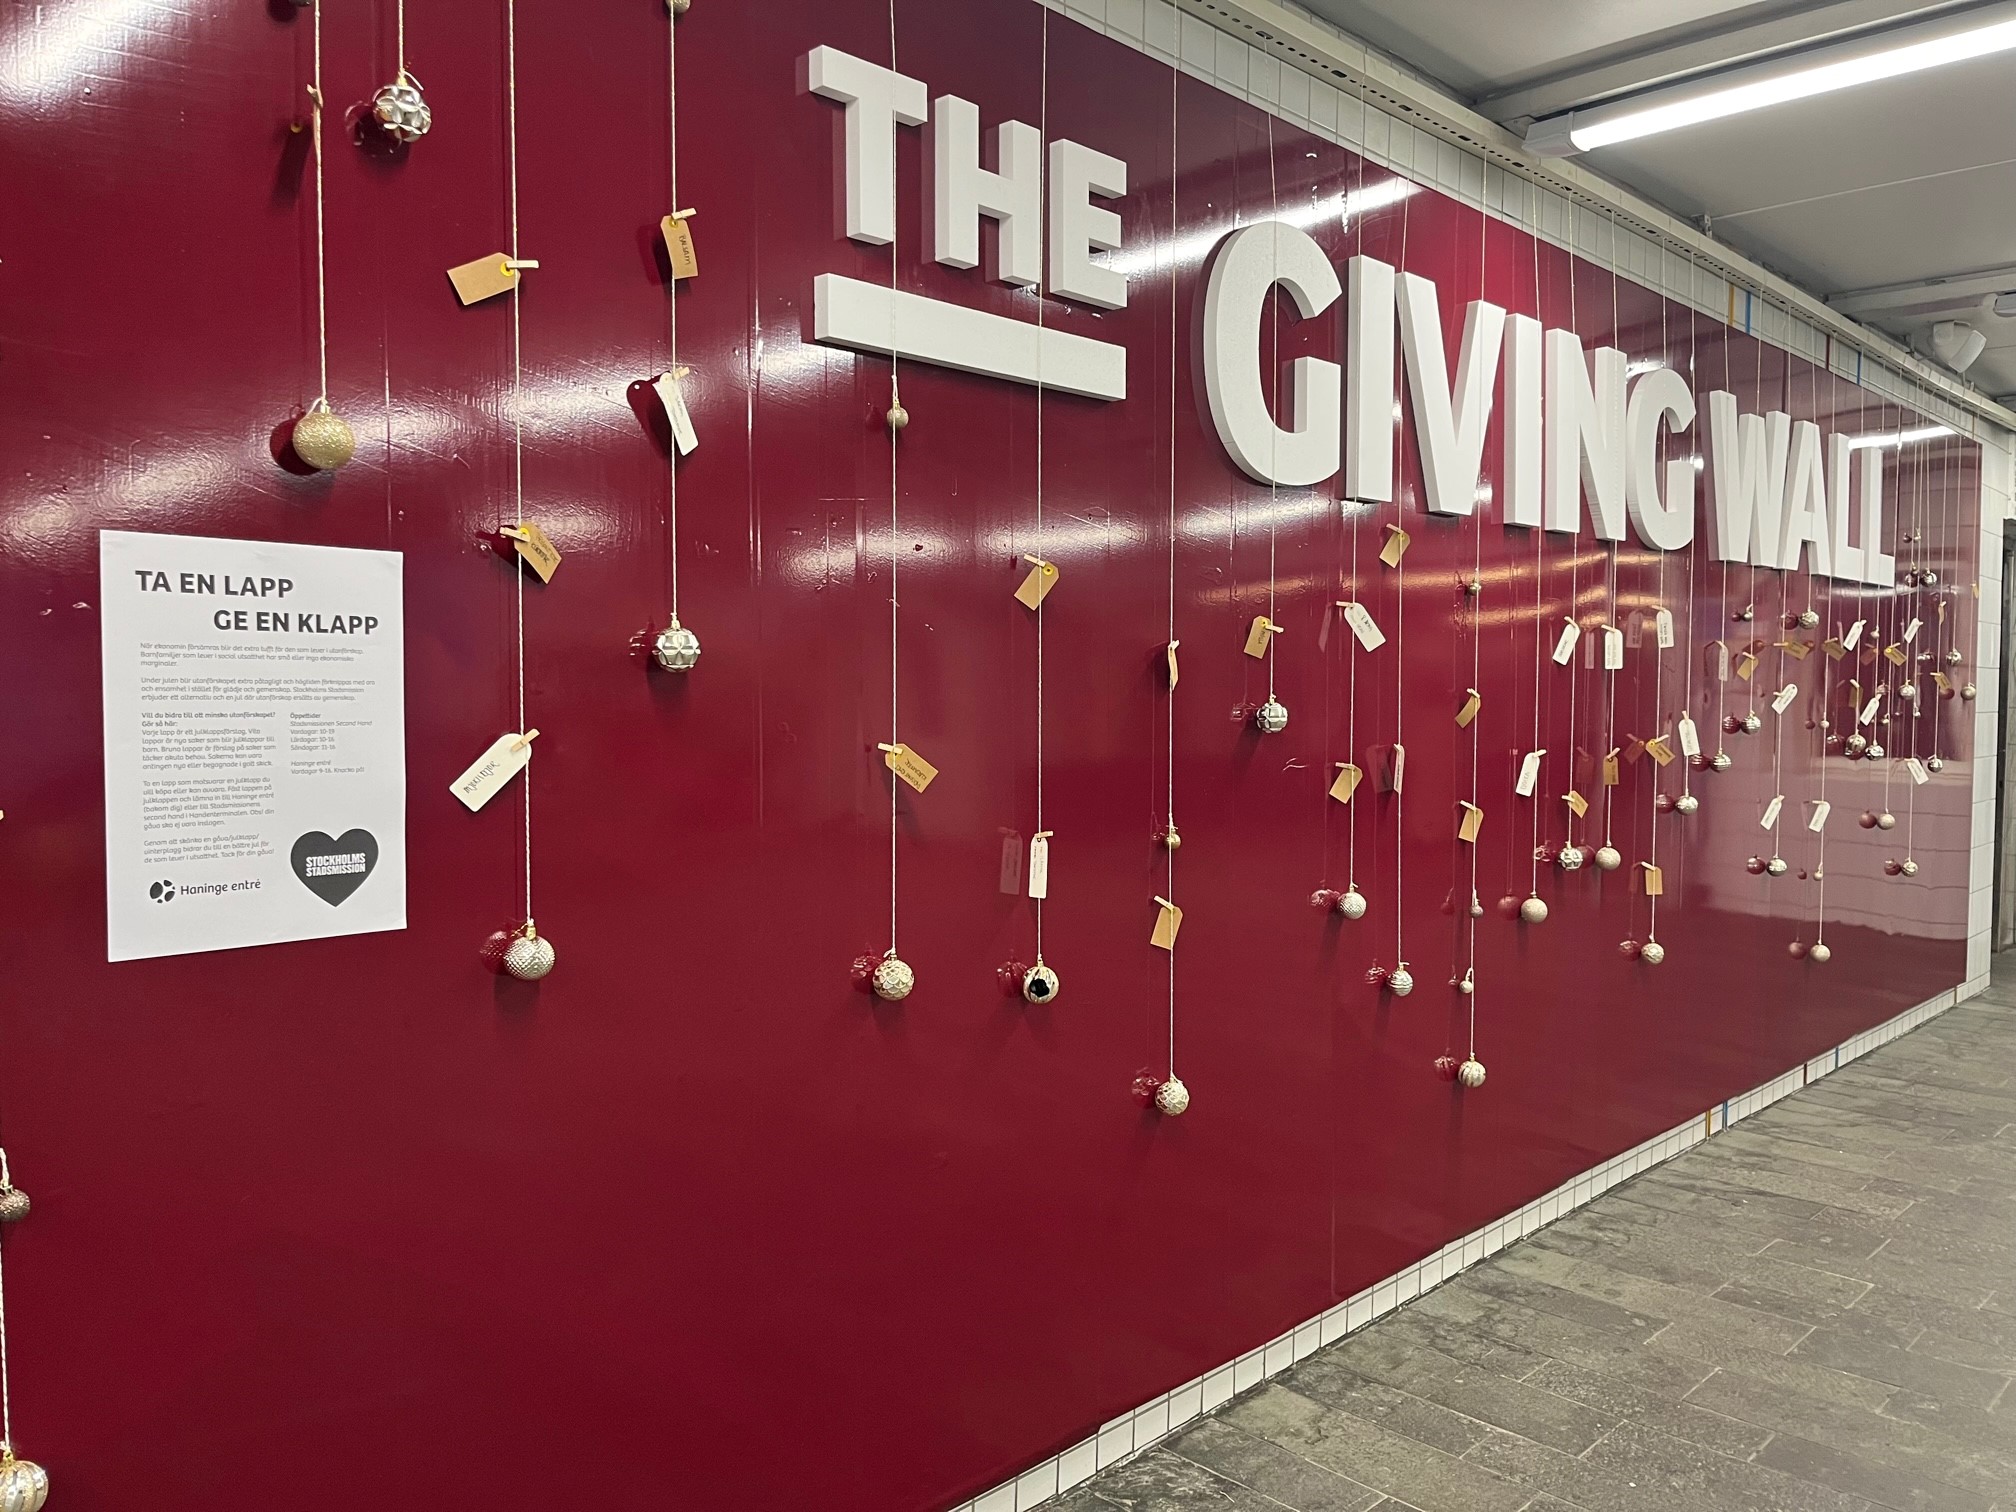 The Giving Wall